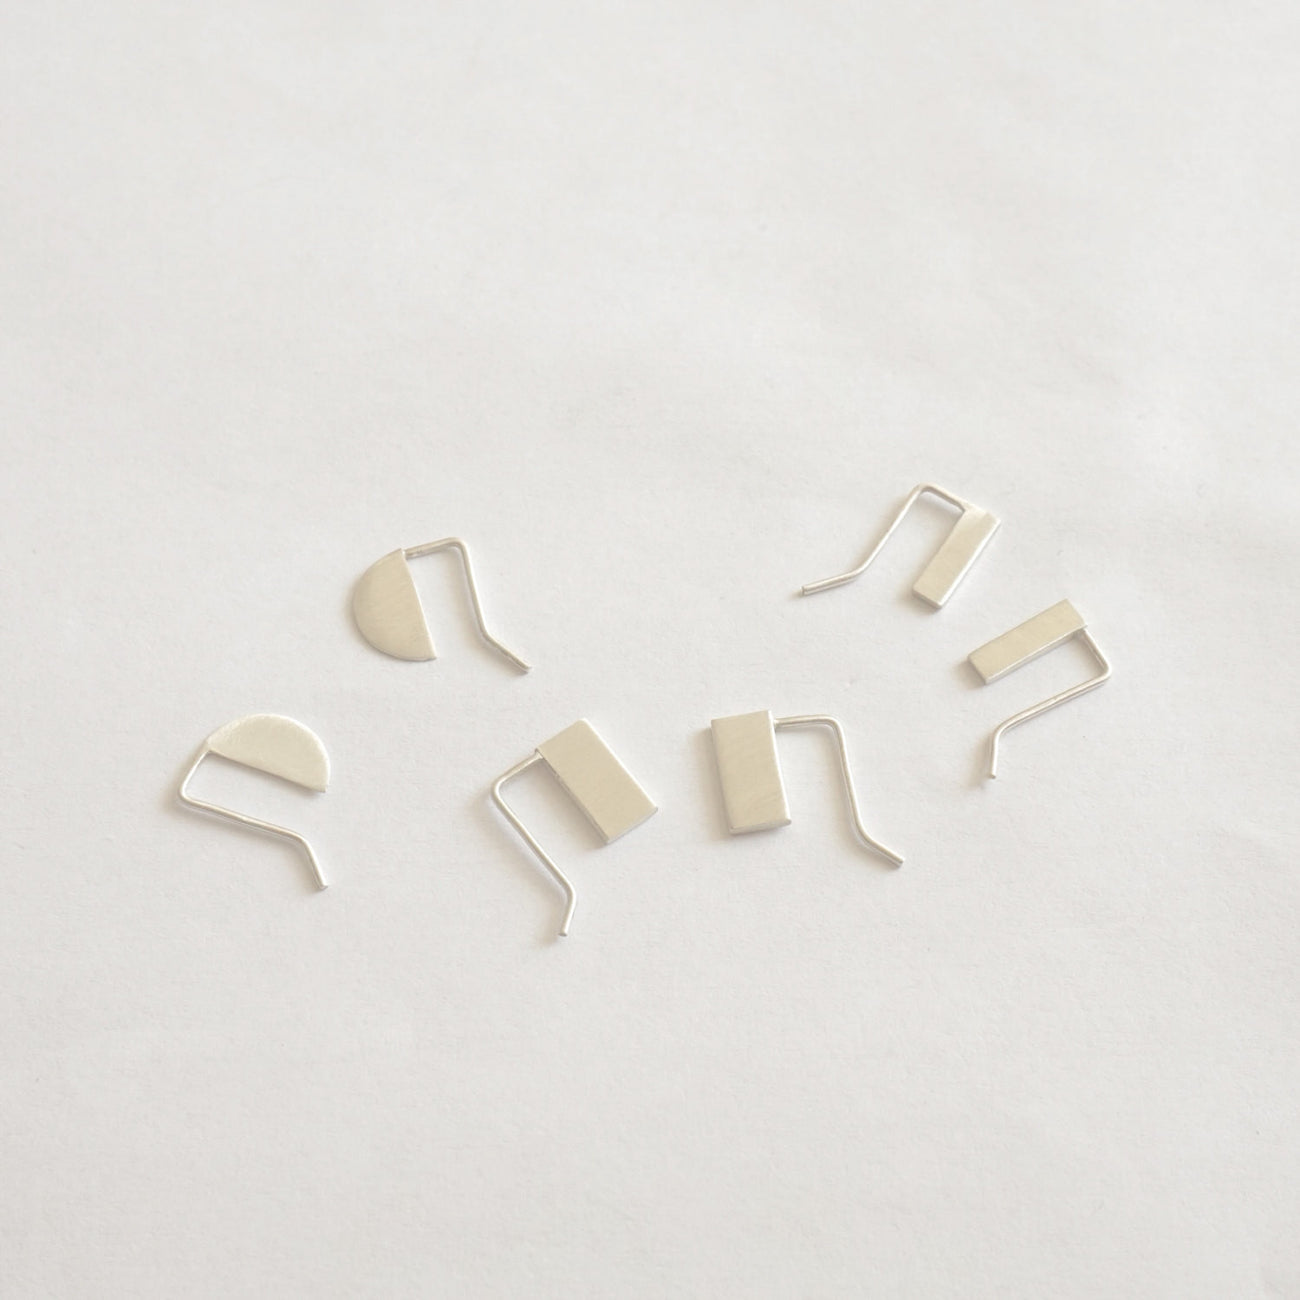 Modern Minimalist Designed Hand-Made Geometric Studs Come as a Set or Individually  - 0265 - Virginia Wynne Designs